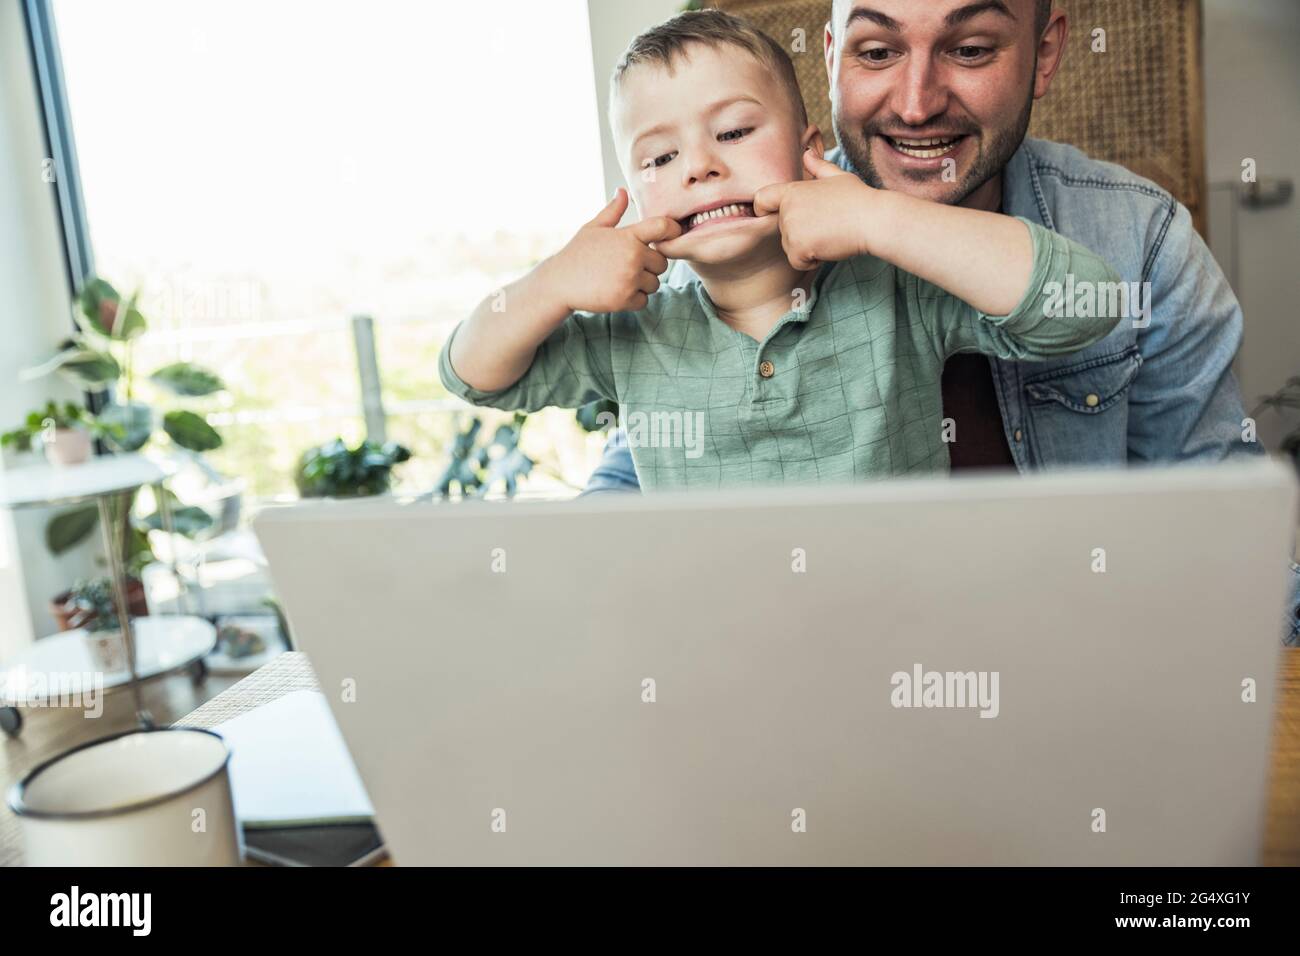 Boy teasing while sitting with father doing video call through laptop at home Stock Photo